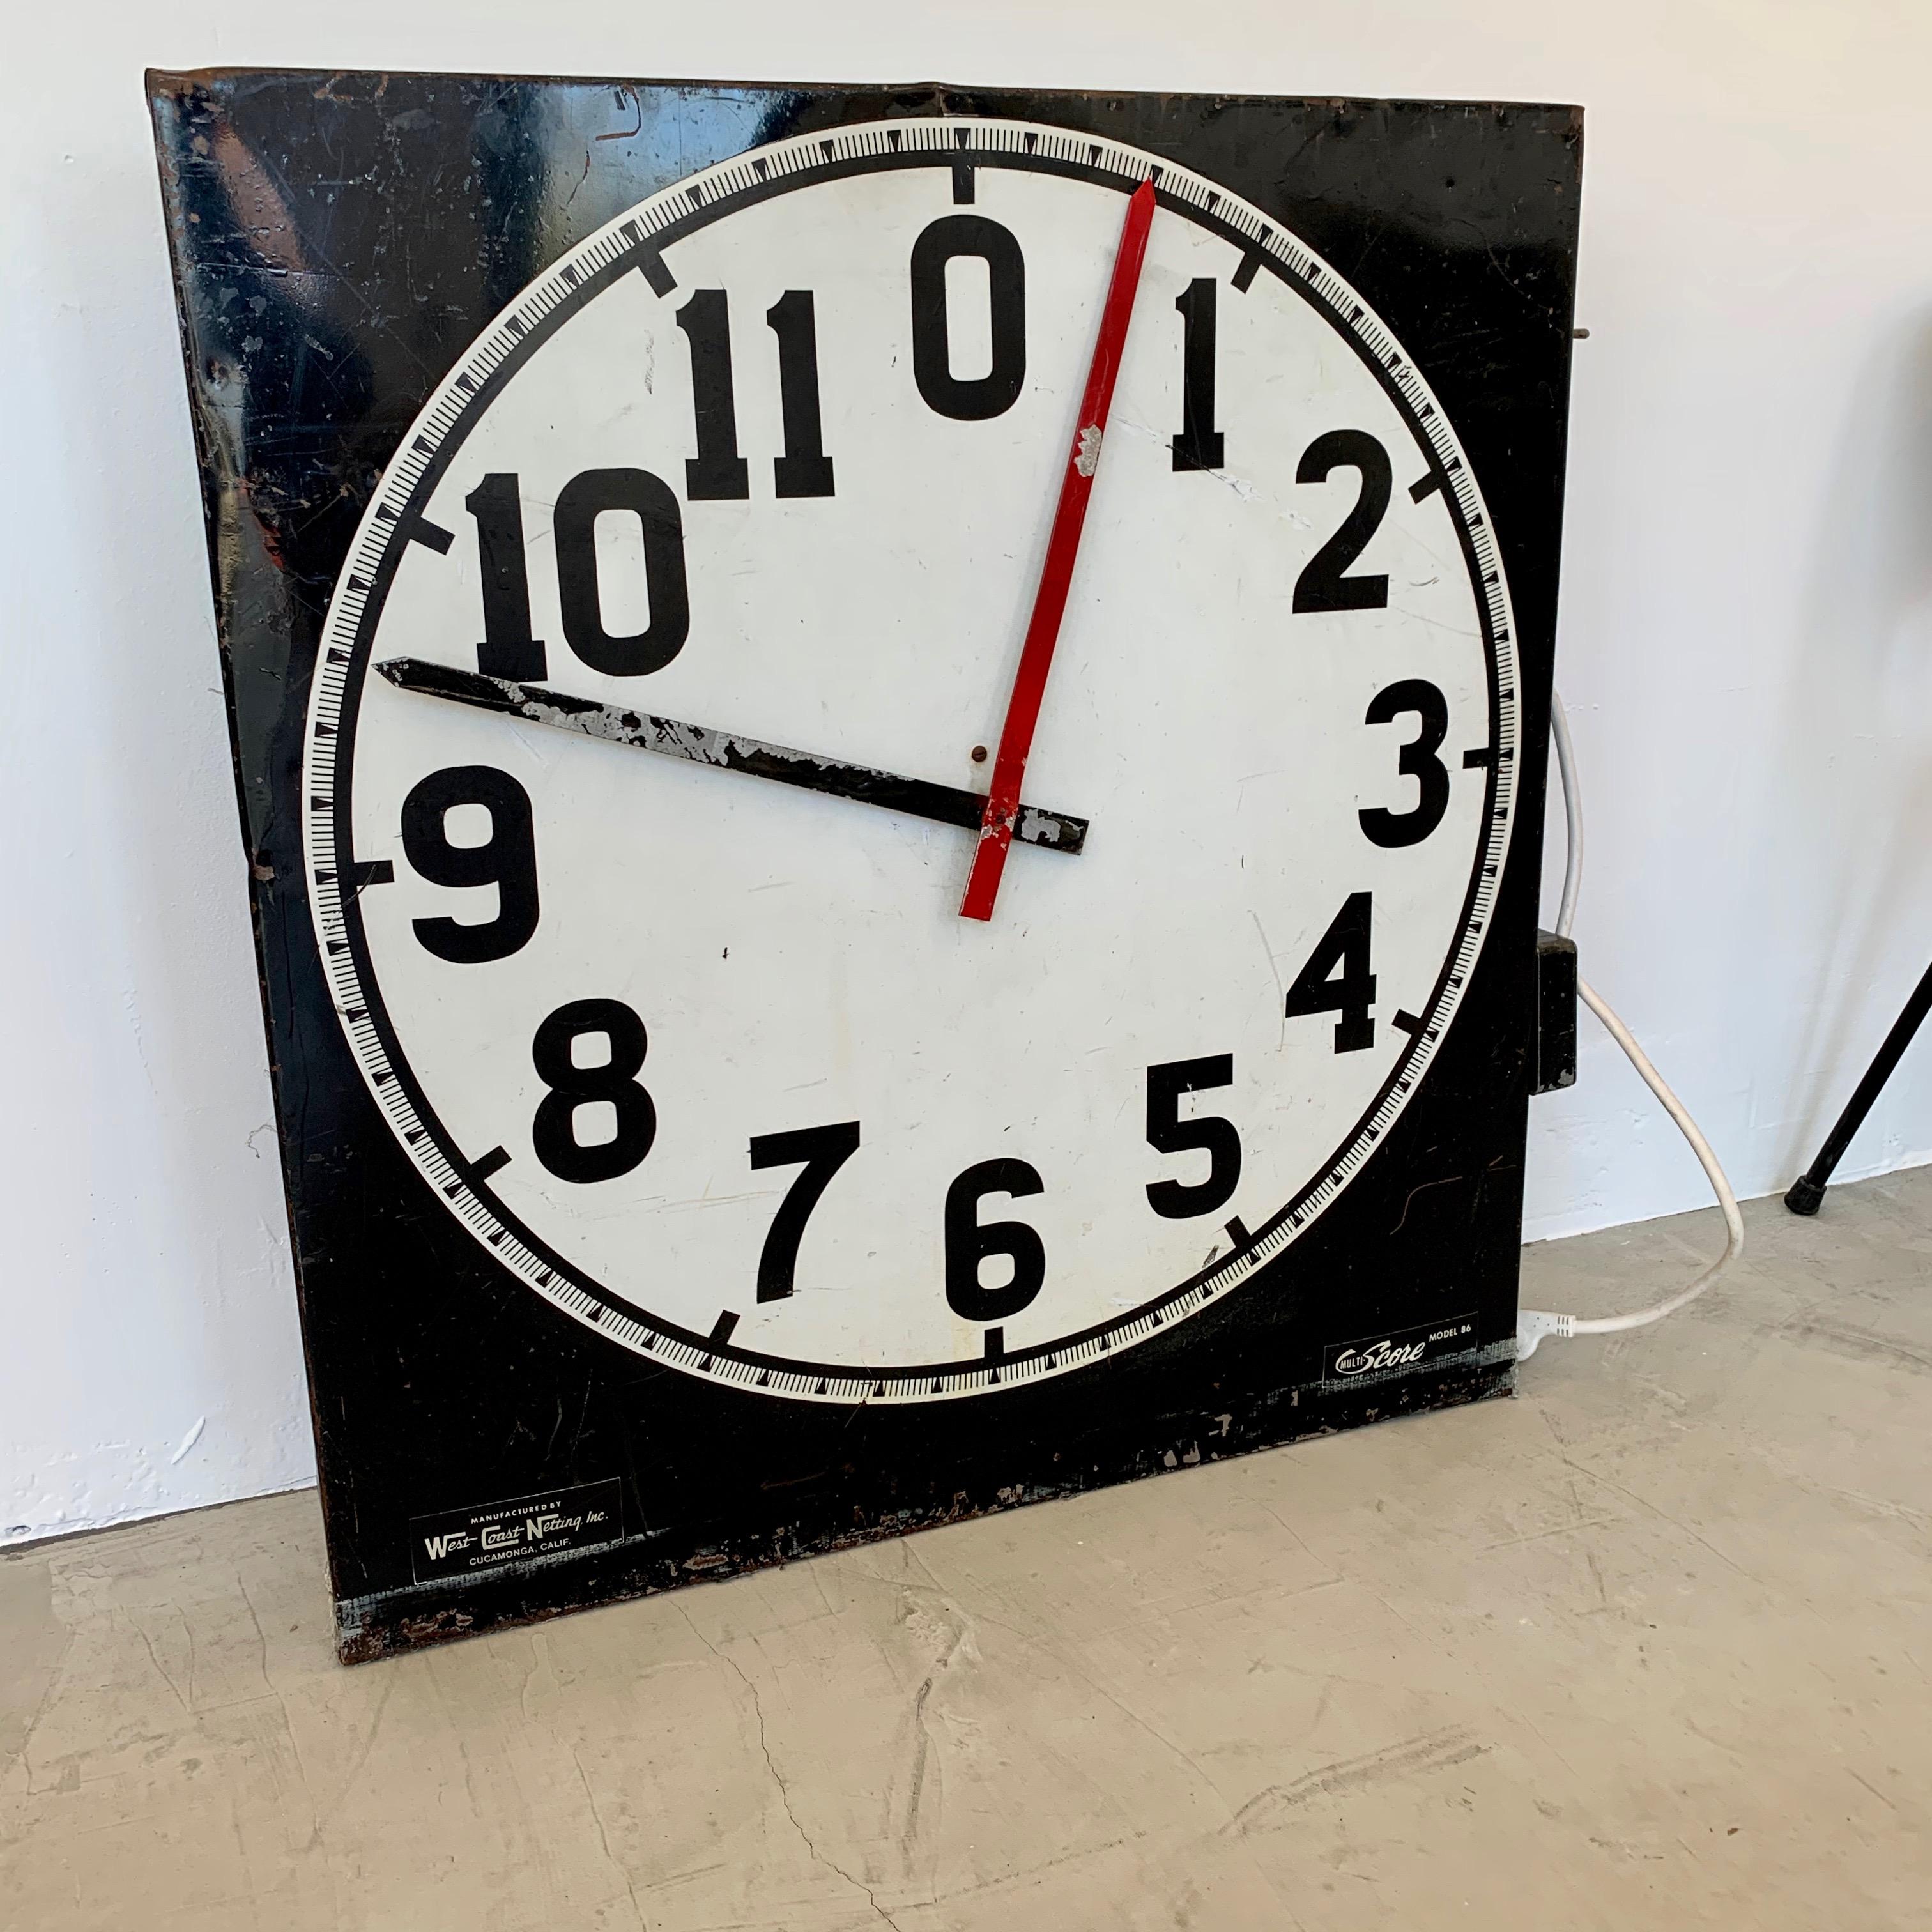 Interesting clock taken down from a gymnasium here in Southern California. Clock can run forwards or backwards. Has a 12 minute timer in either direction. Would look great hanging on the wall or placed on the floor. Large scale. Measures: 2.5ft x